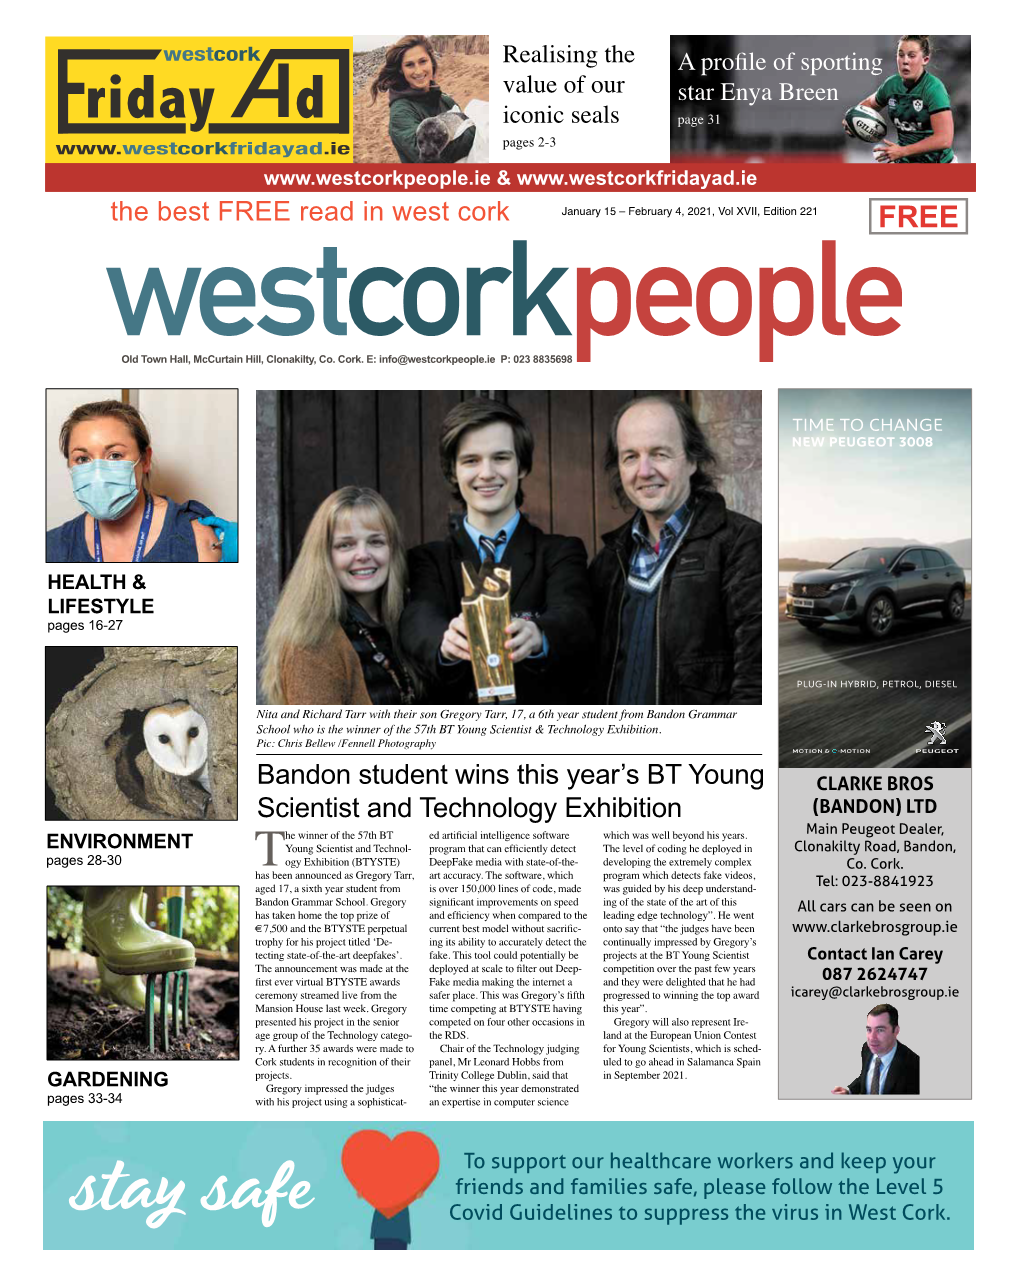 Bandon Student Wins This Year's BT Young Scientist and Technology